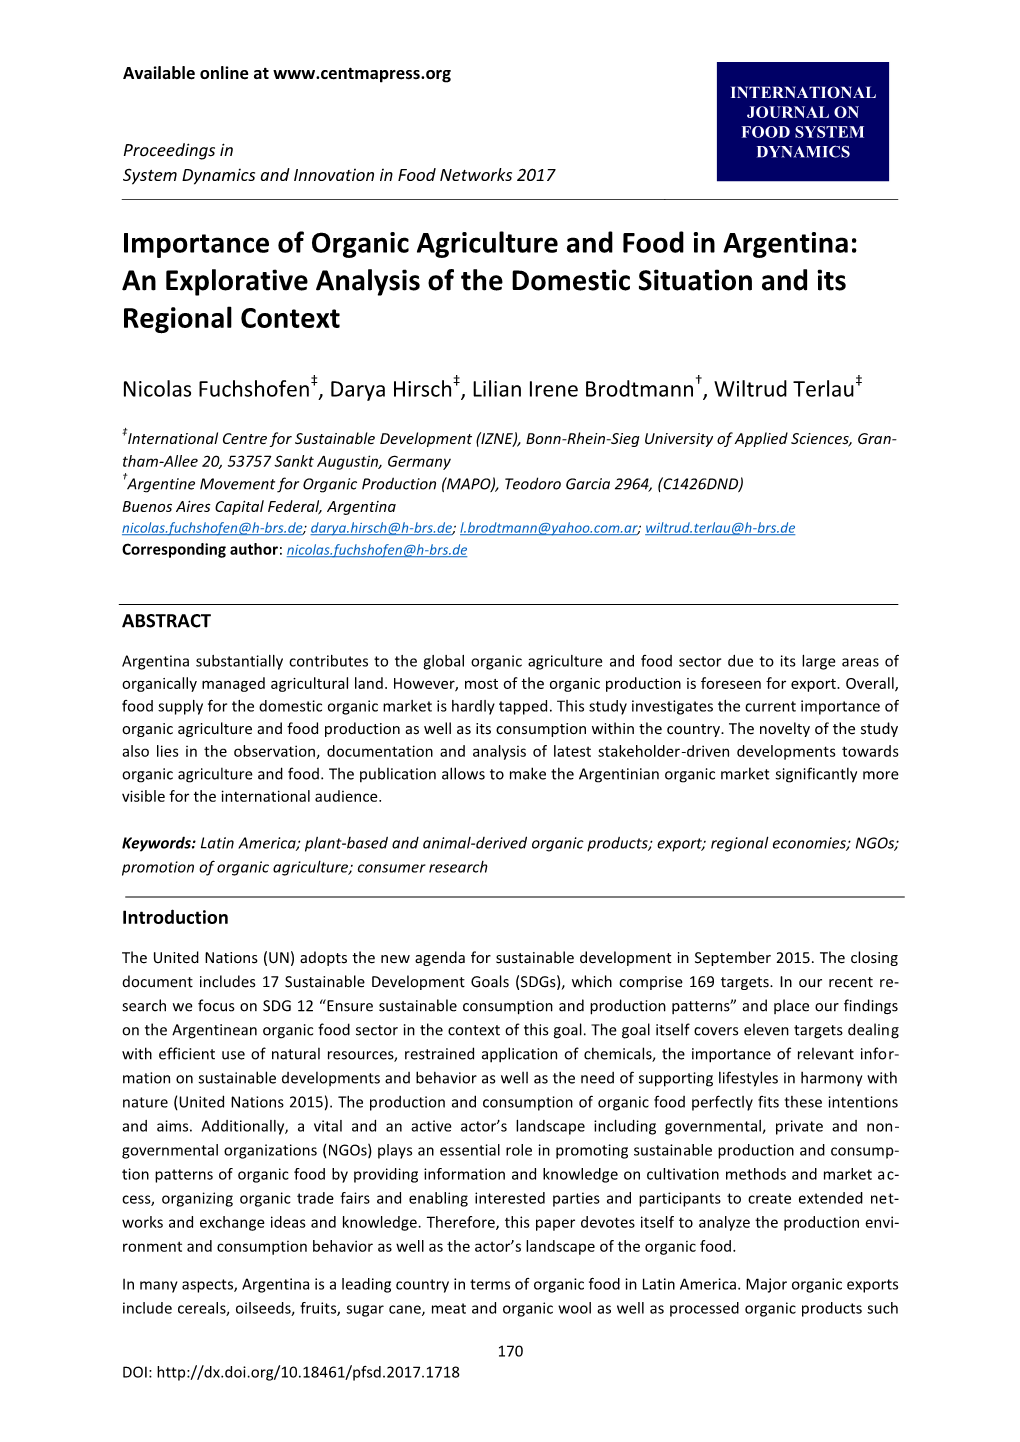 Importance of Organic Agriculture and Food in Argentina: an Explorative Analysis of the Domestic Situation and Its Regional Context